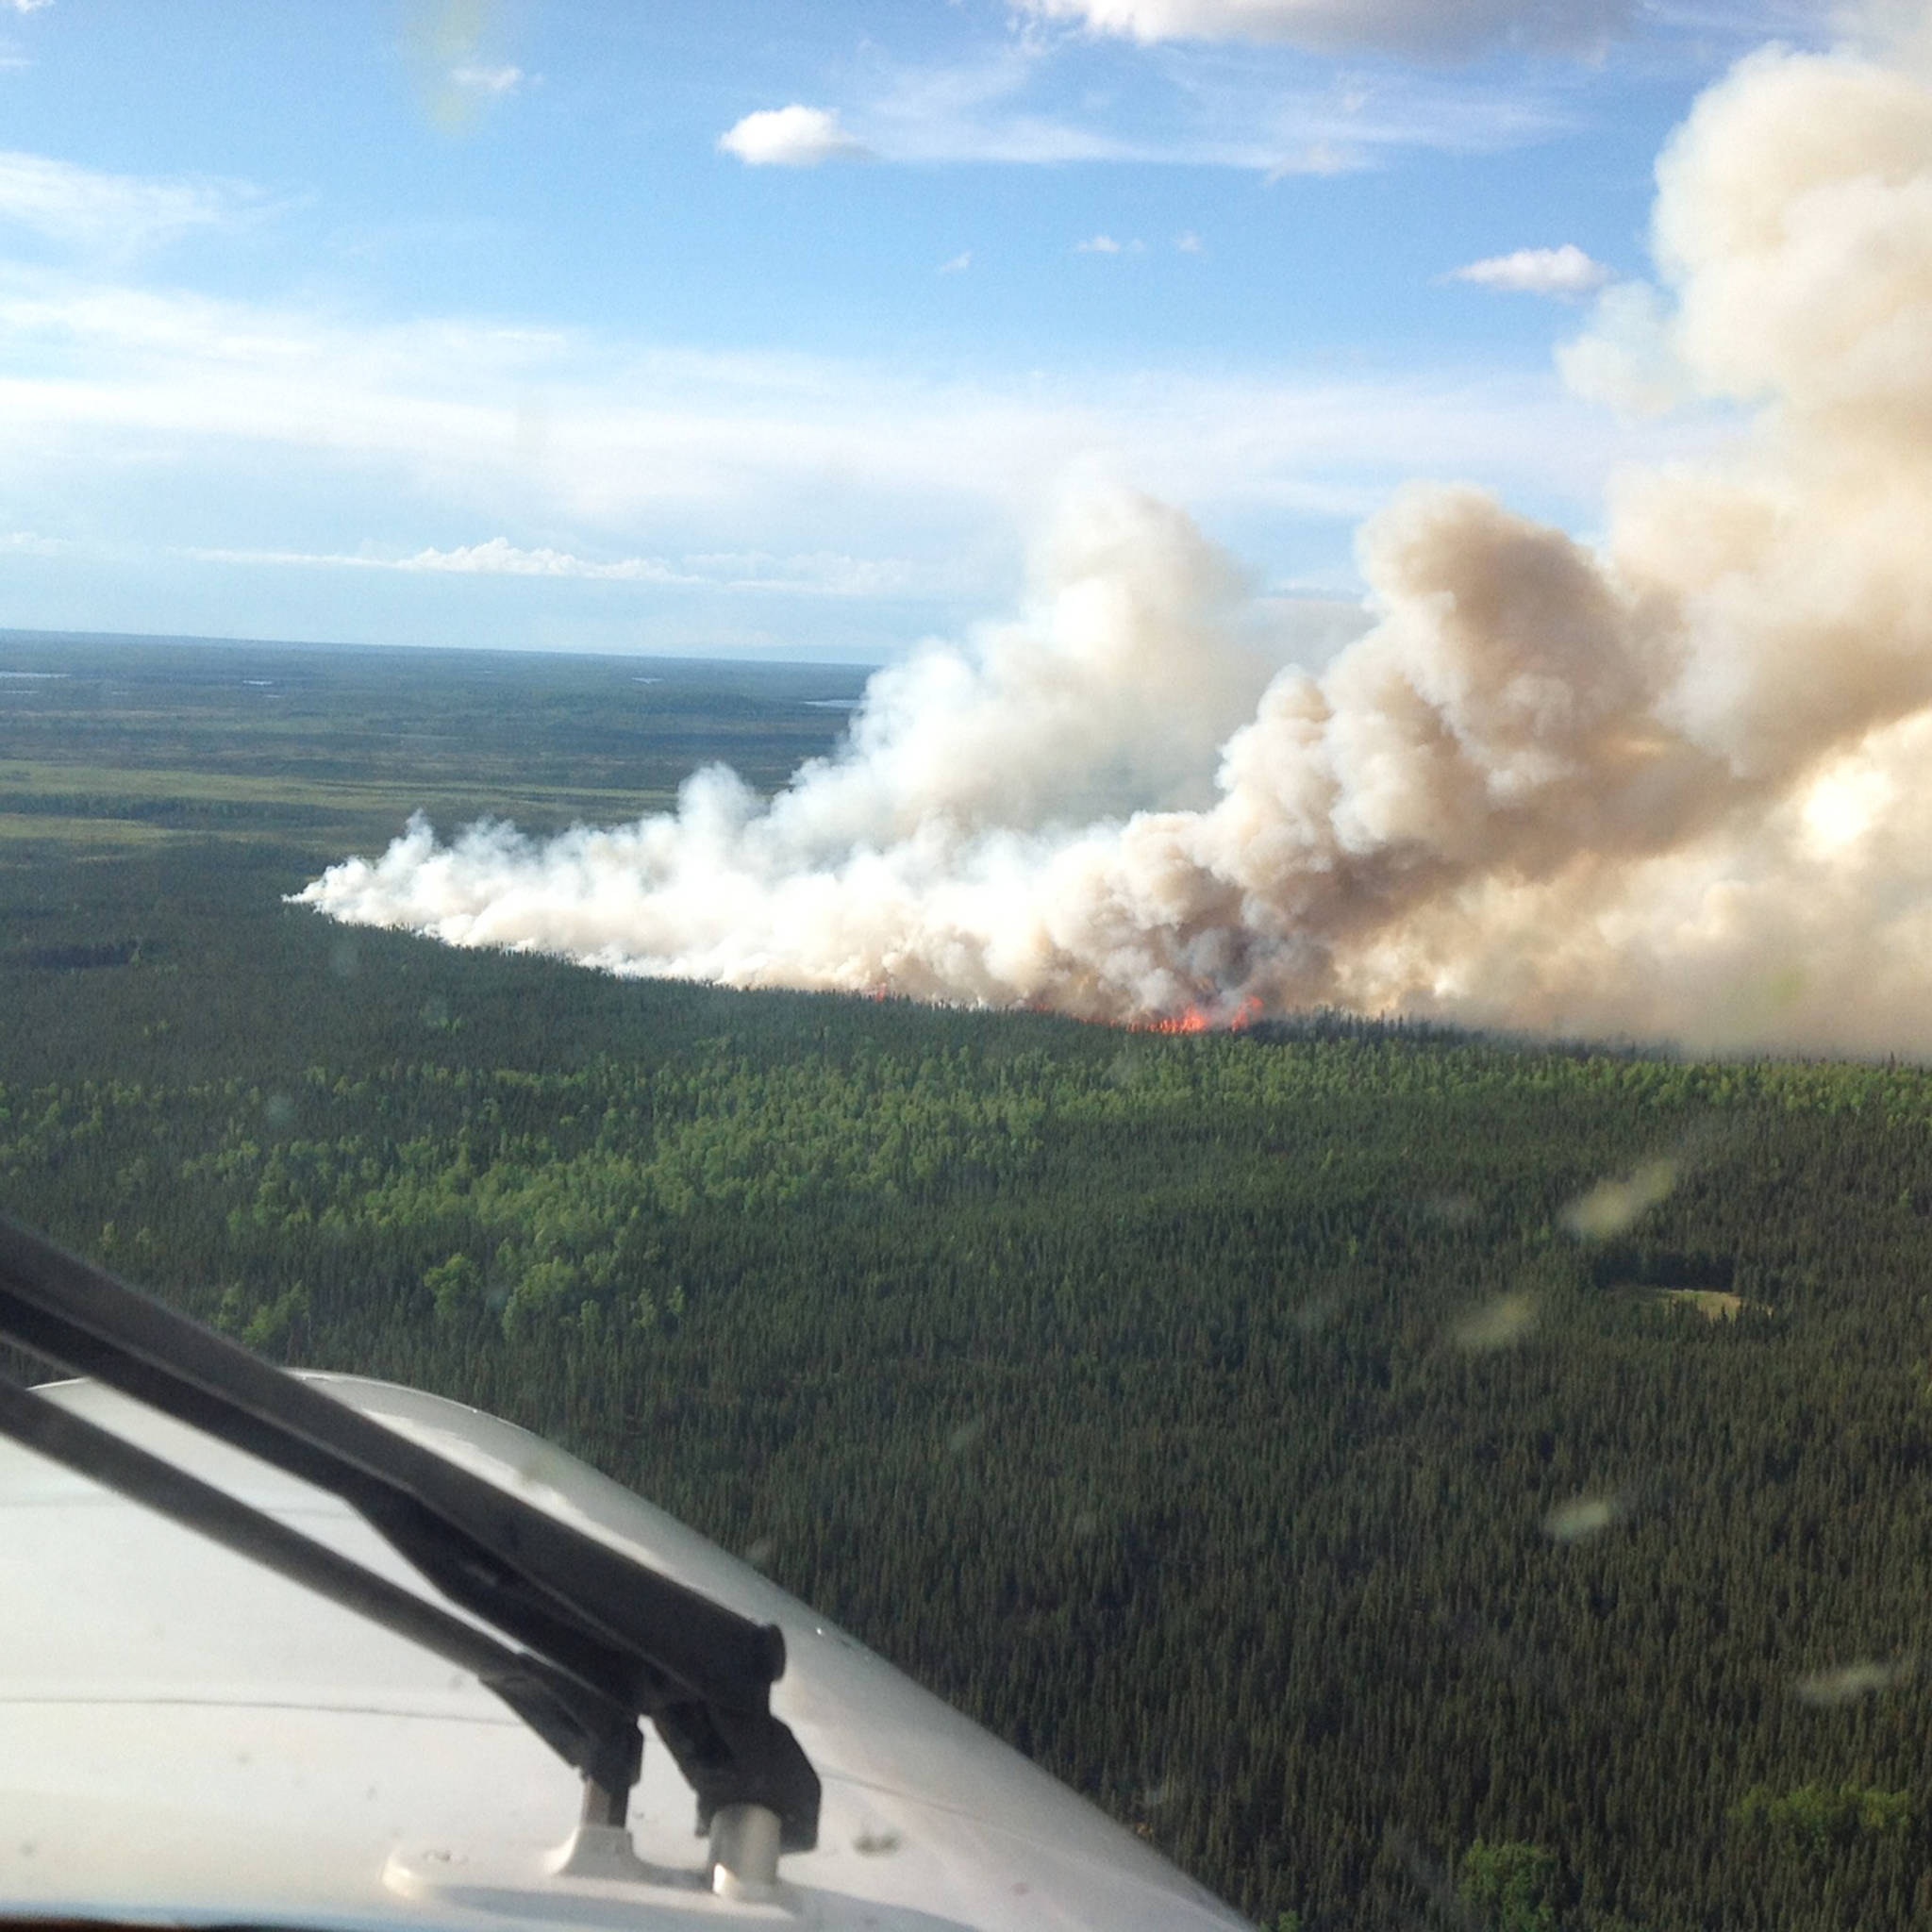 The East Fork wildfire burns in the Kenai National Wildlife Refuge as seen from the air Thursday, June 15, 2017 near Sterling, Alaska. (Photo courtesy Tim Mowry, Alaska Division of Forestry)